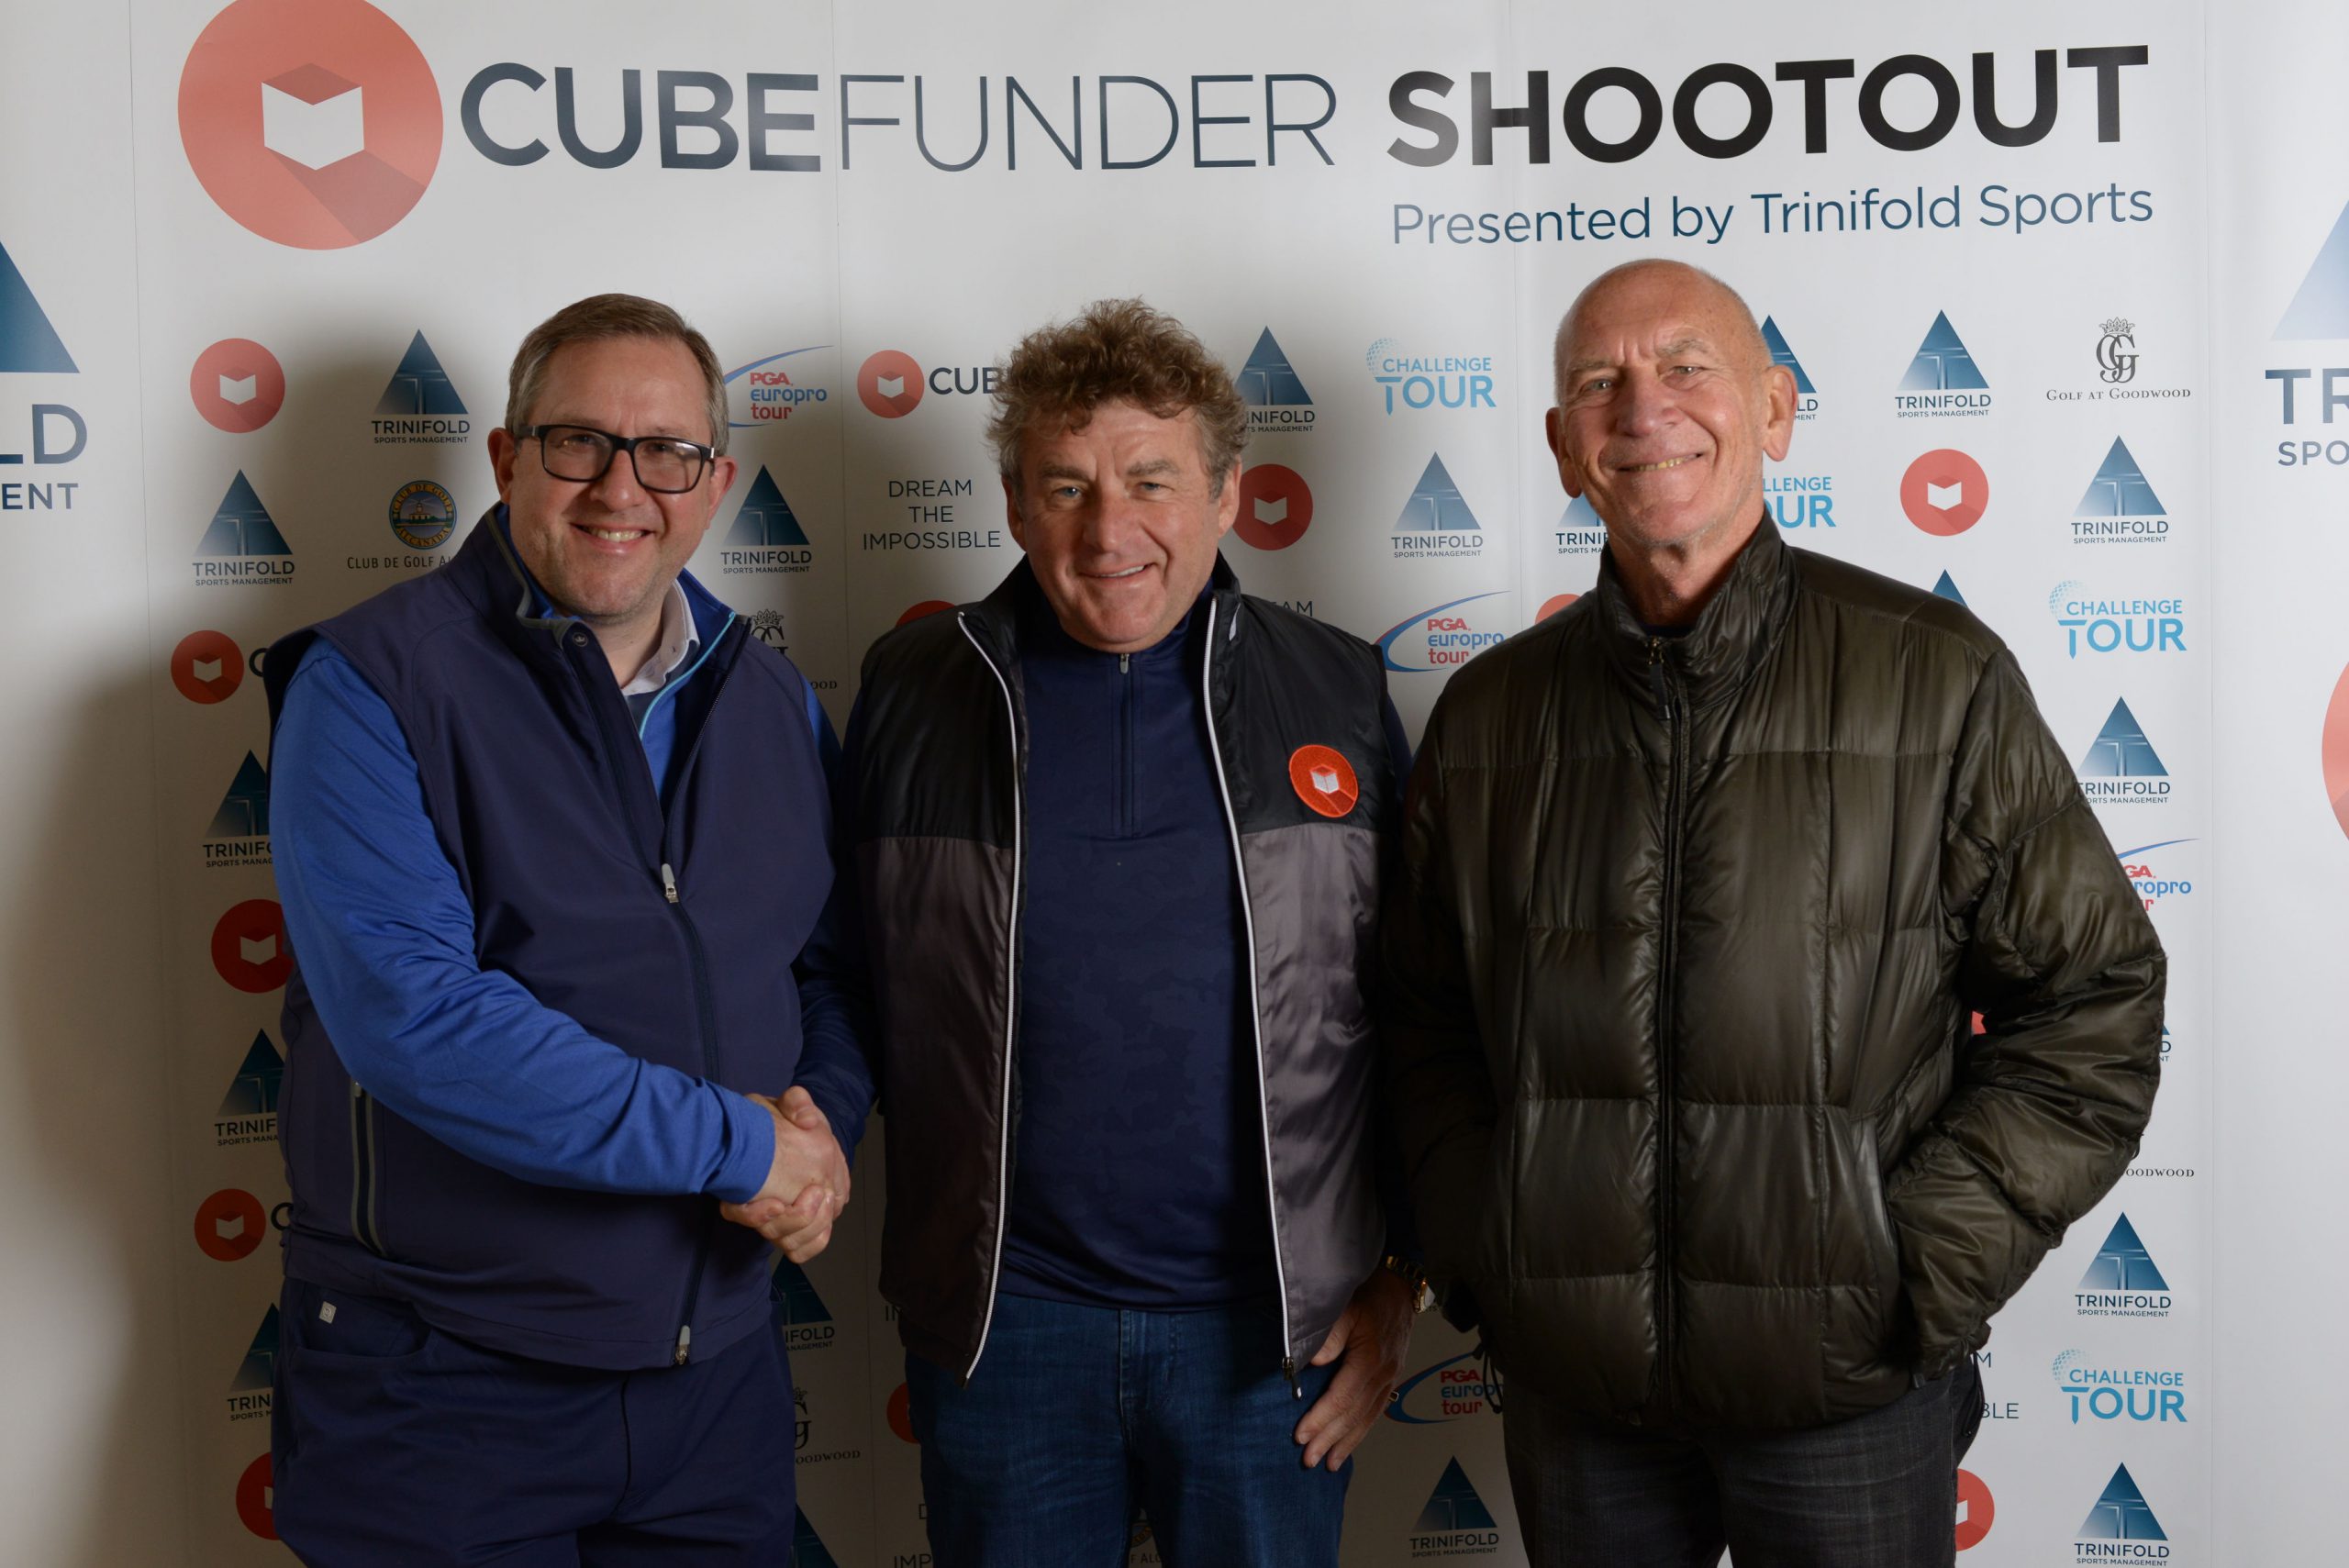 Trinifold creates ‘Challenge Tour’ opportunities for athletes with Cubefunder support